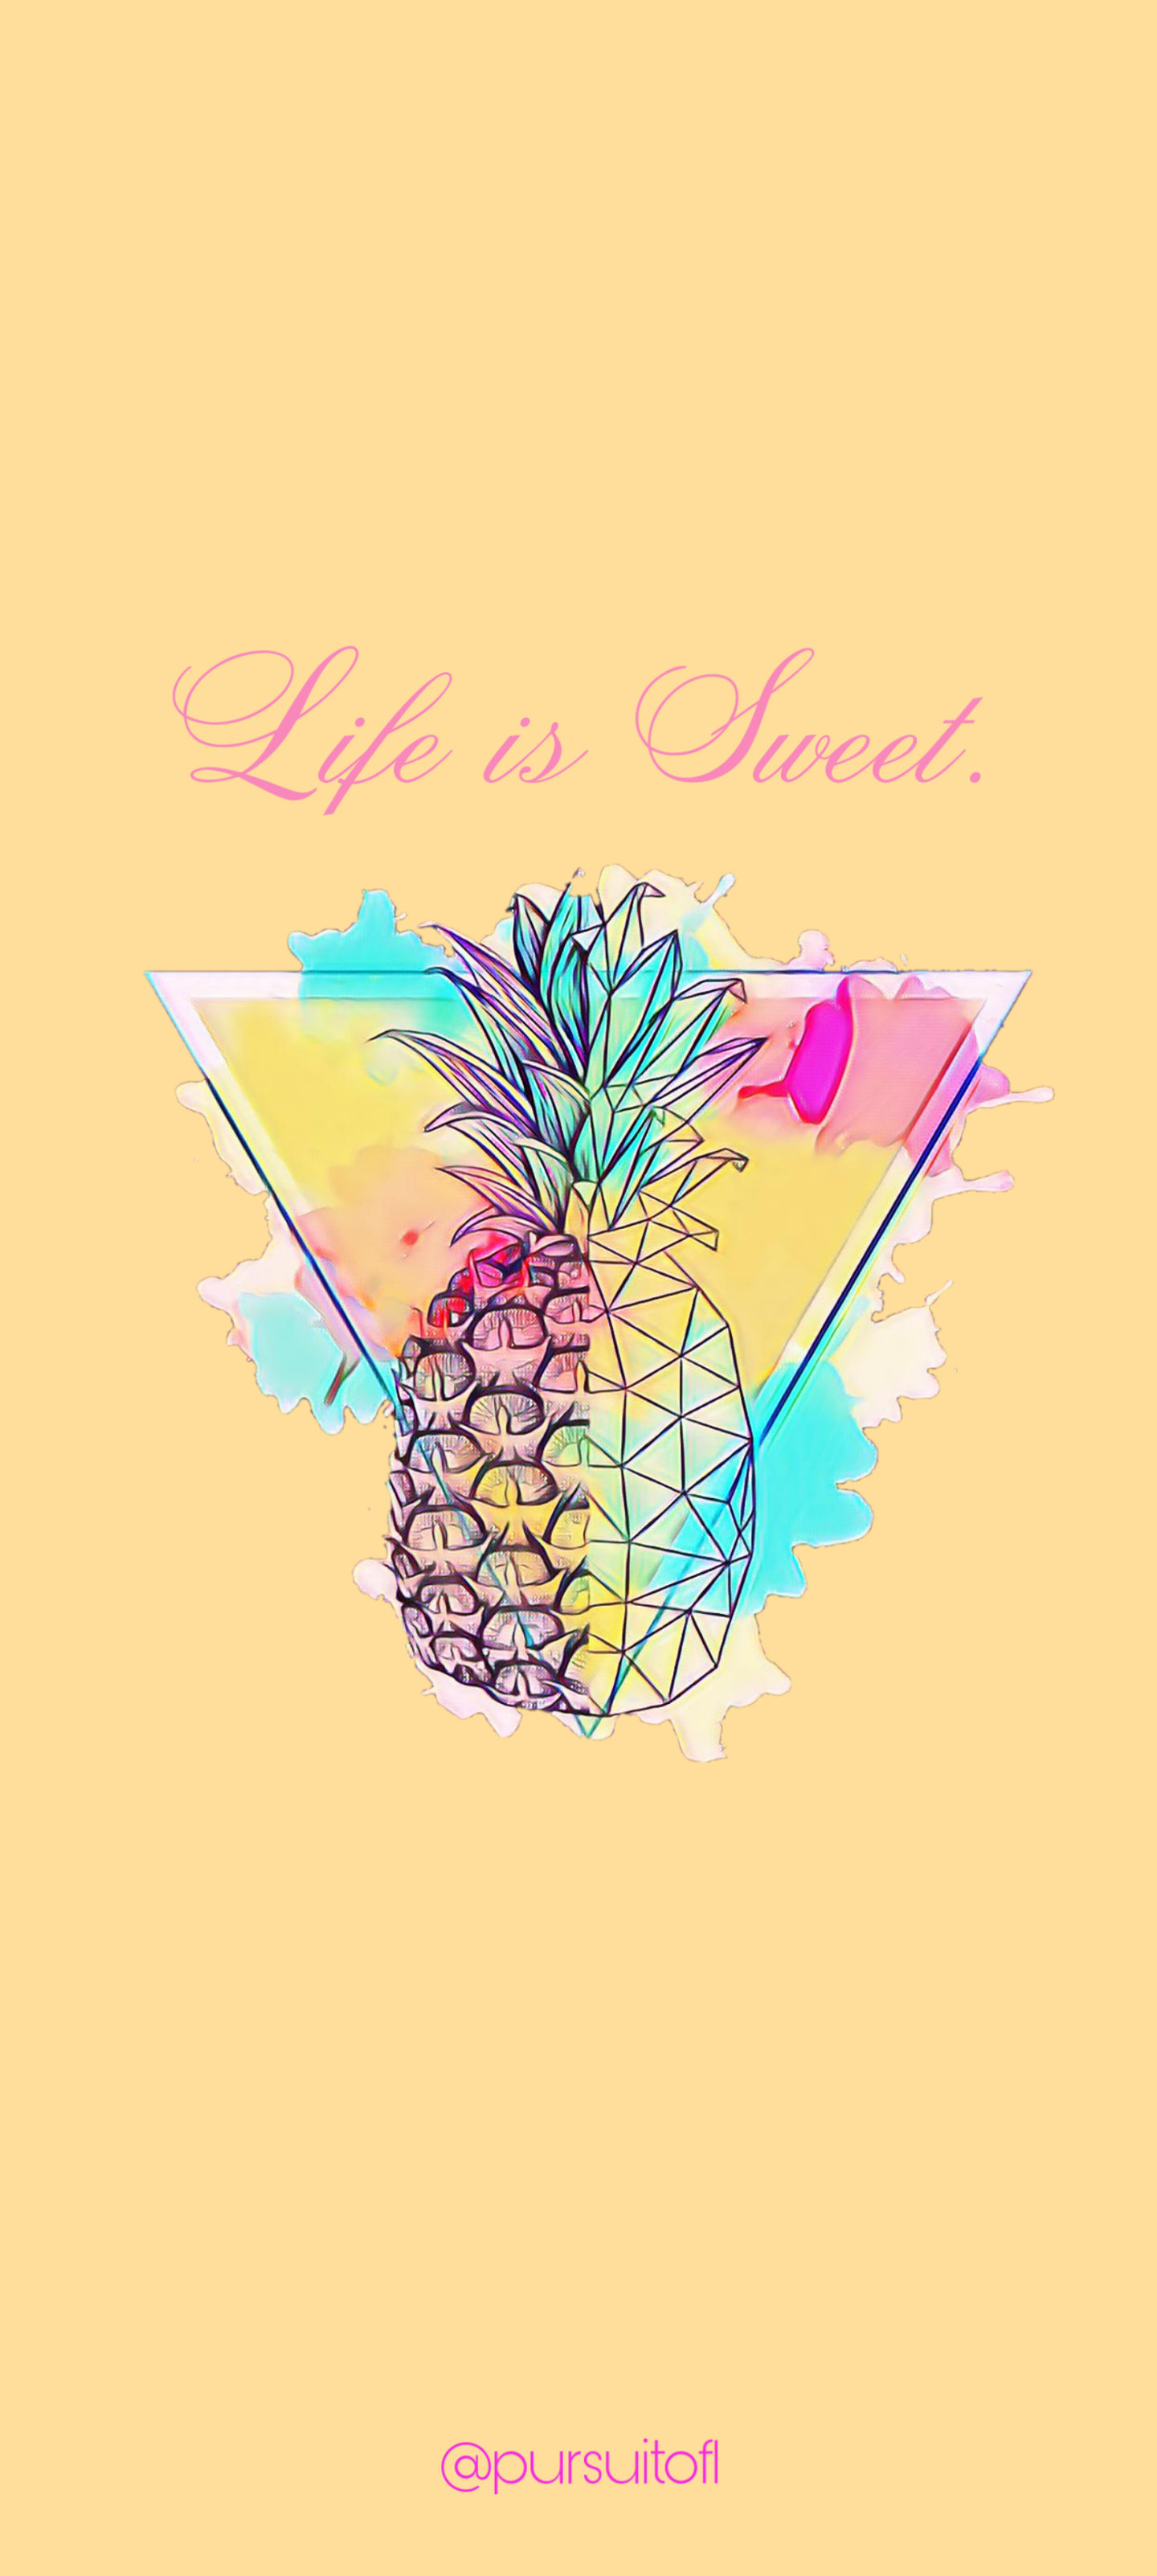 Yellow phone wallpaper with multicolor half geometric half real pineapple with life is sweet text